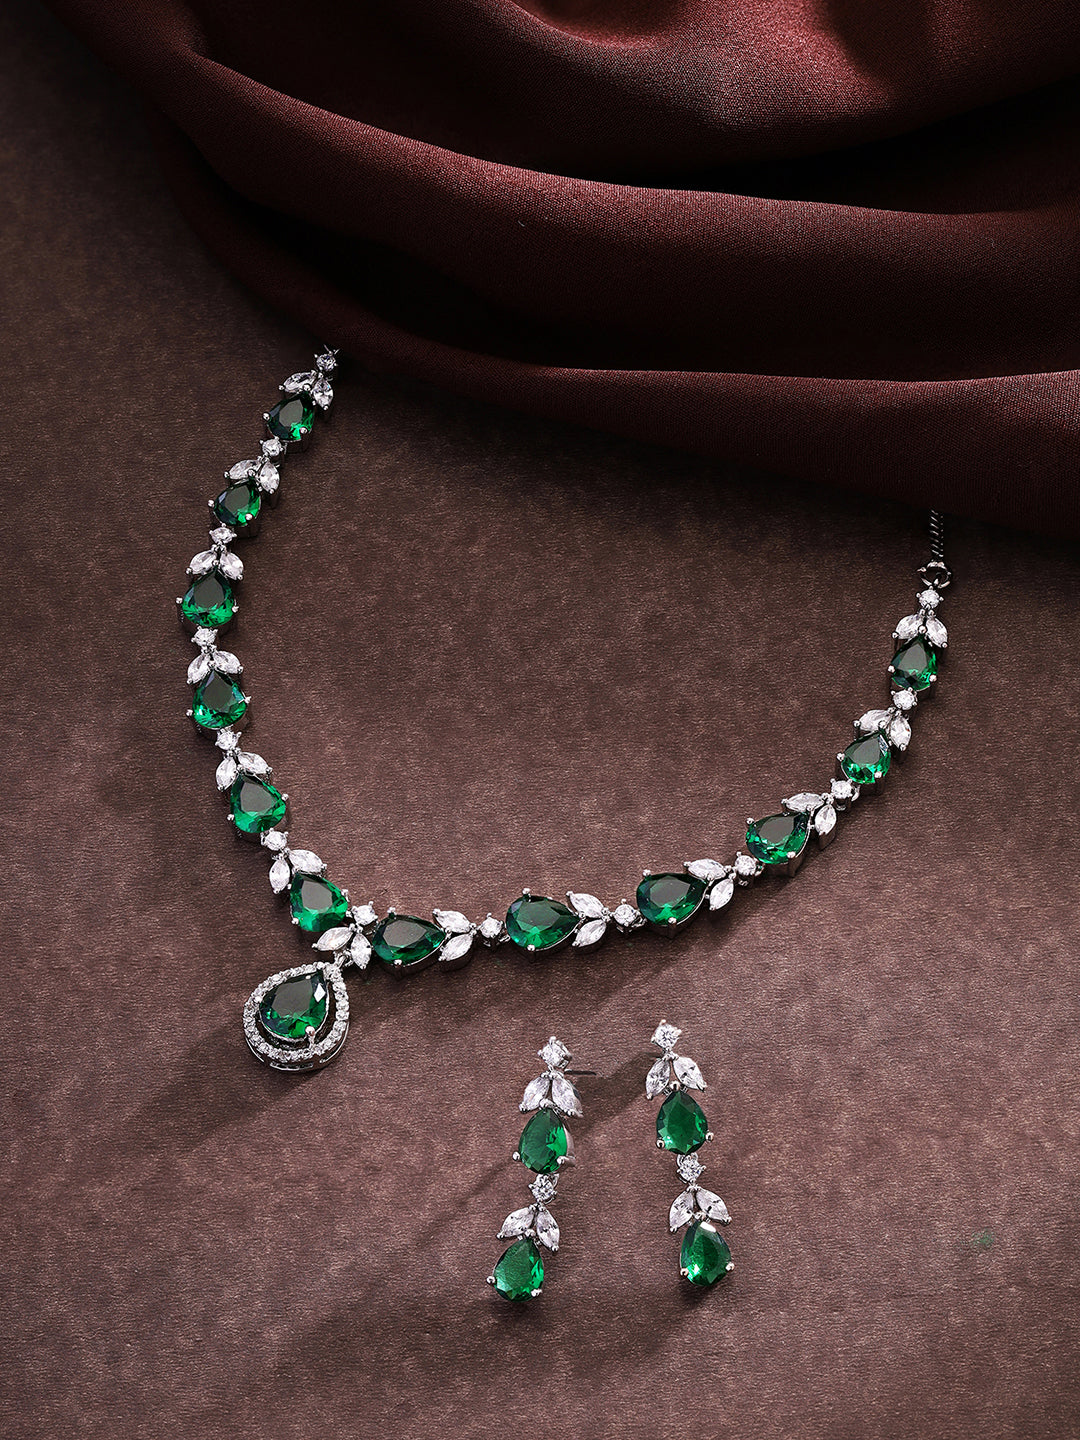 Priyaasi Silver-Plated Splendor with American Diamond Jewellery Set and Exquisite Drop-Shaped Stones